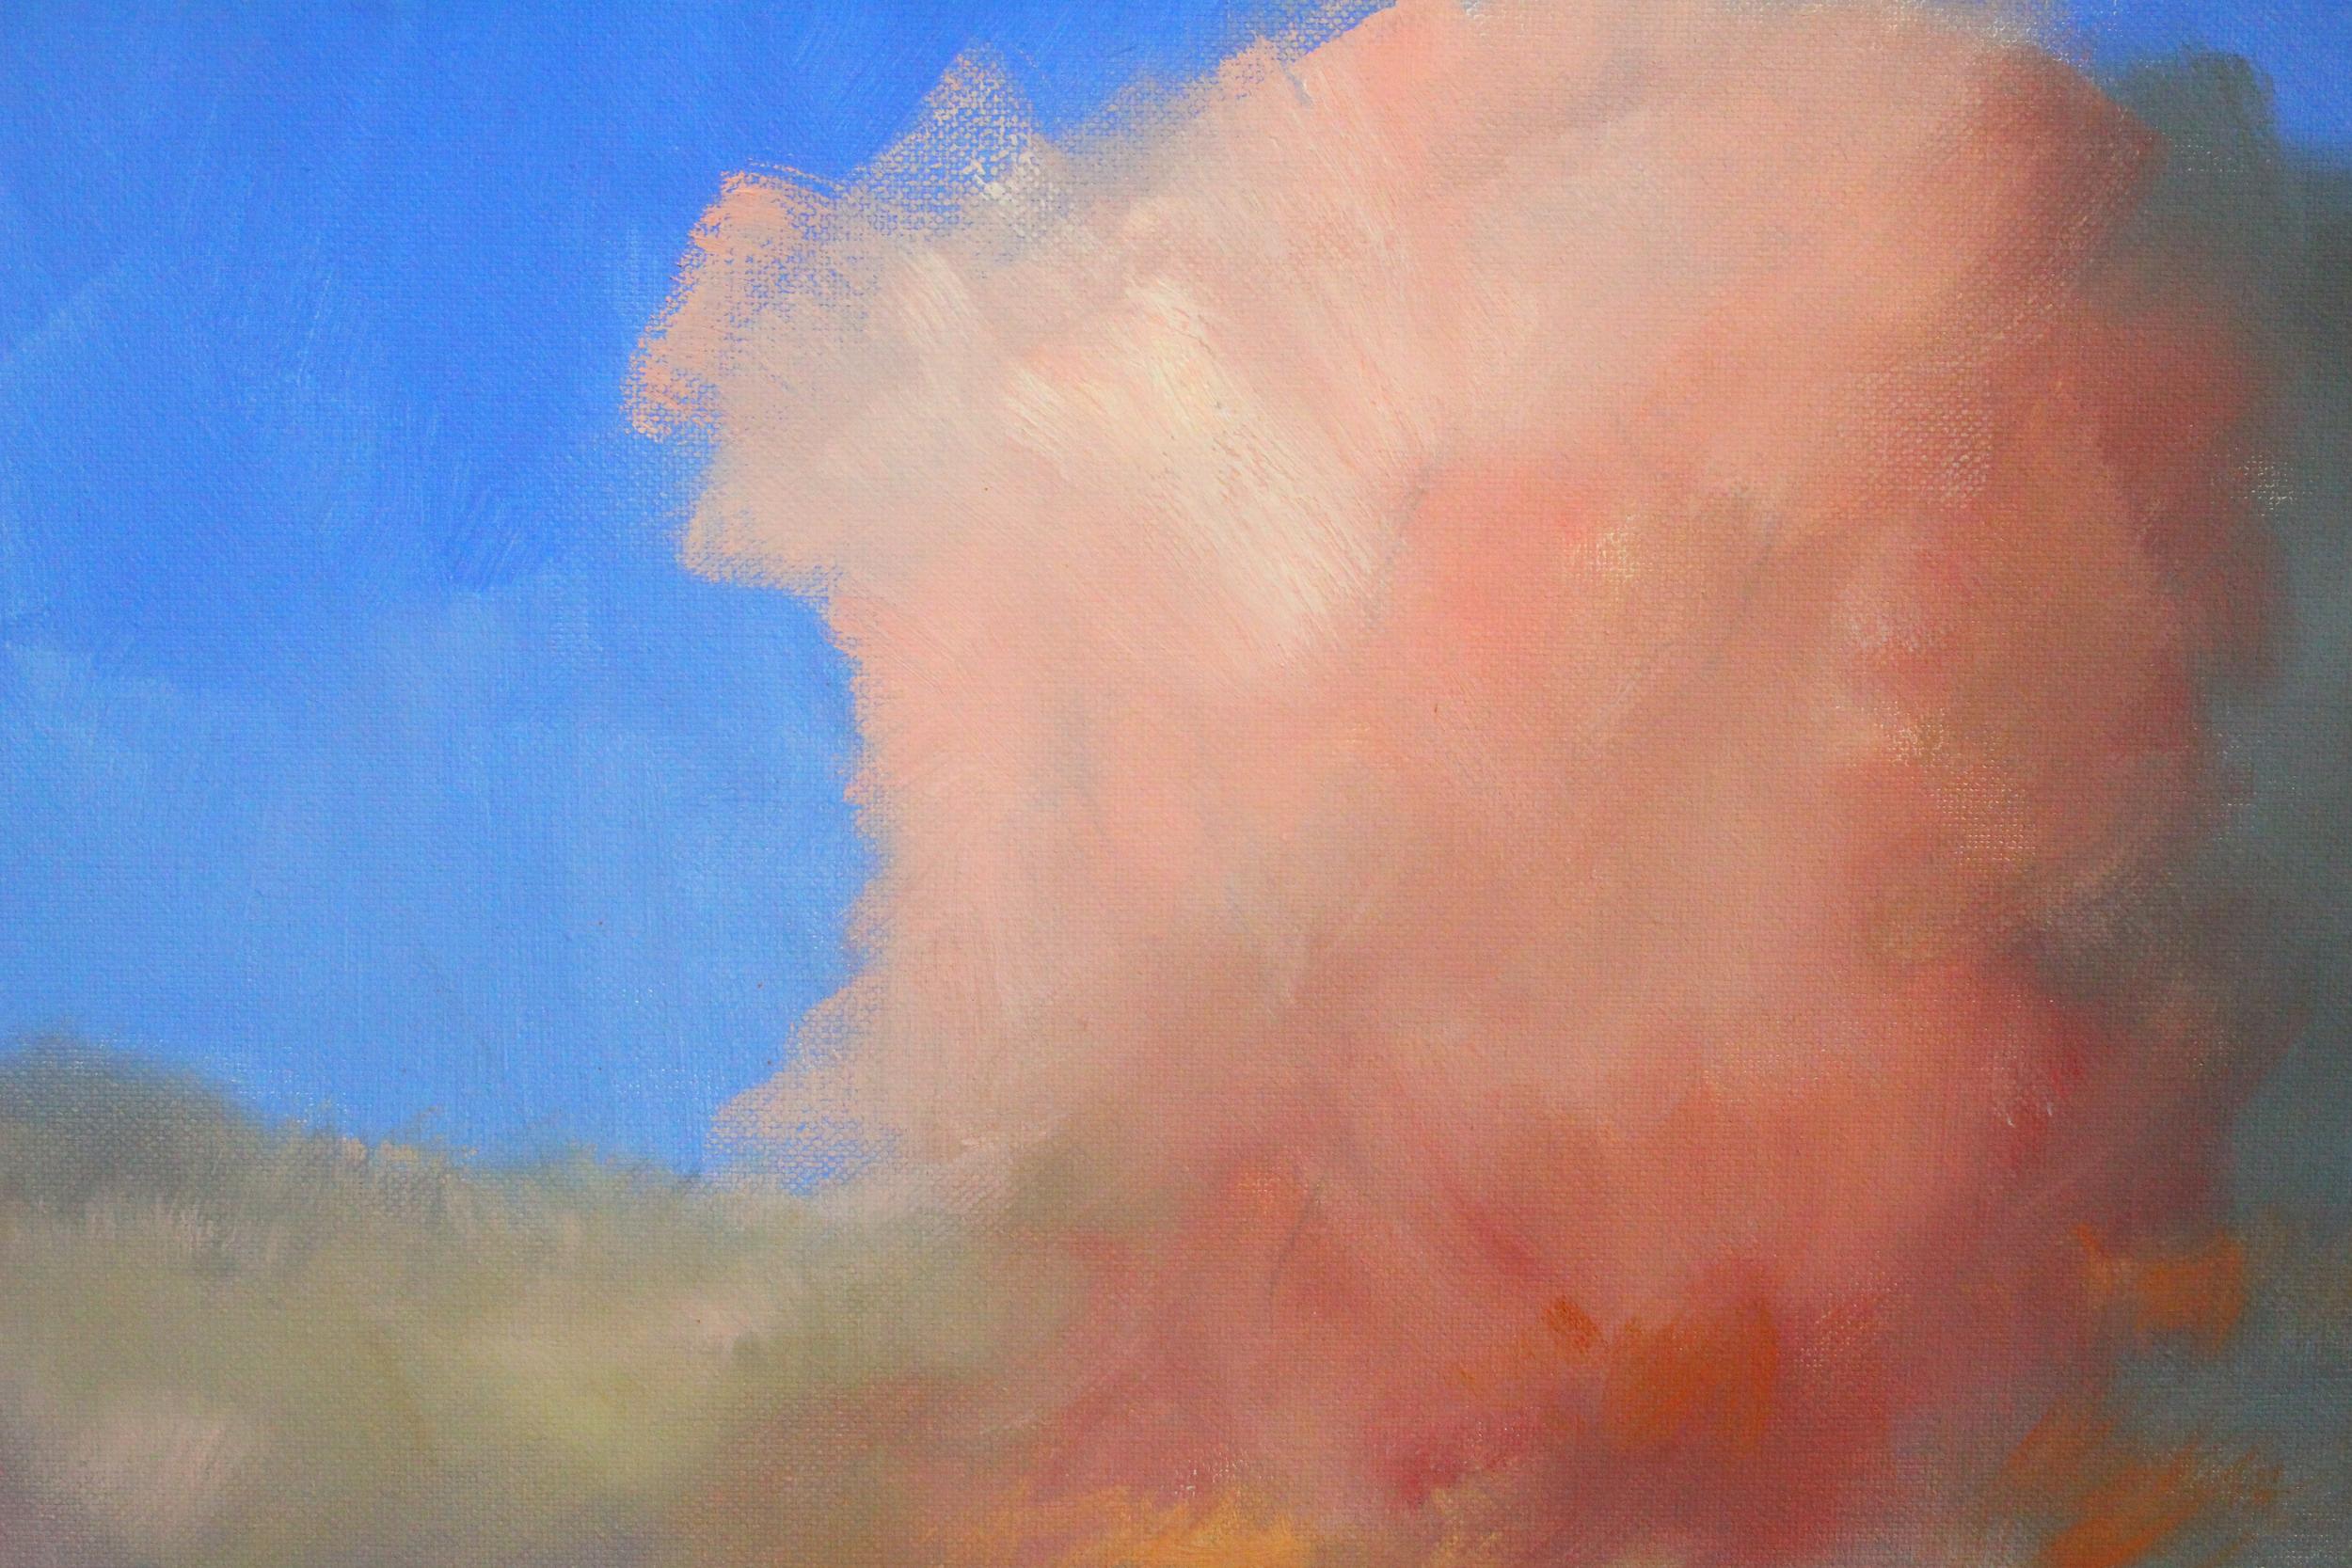 <p>Artist Comments<br />Nancy says she was inspired by a beautiful pink cloud that hovered over the Pacific Ocean one evening. She was drawn to the delicate pastel color against the deep blue water.</p><br /><p>About the Artist<br />Nancy Merkle's